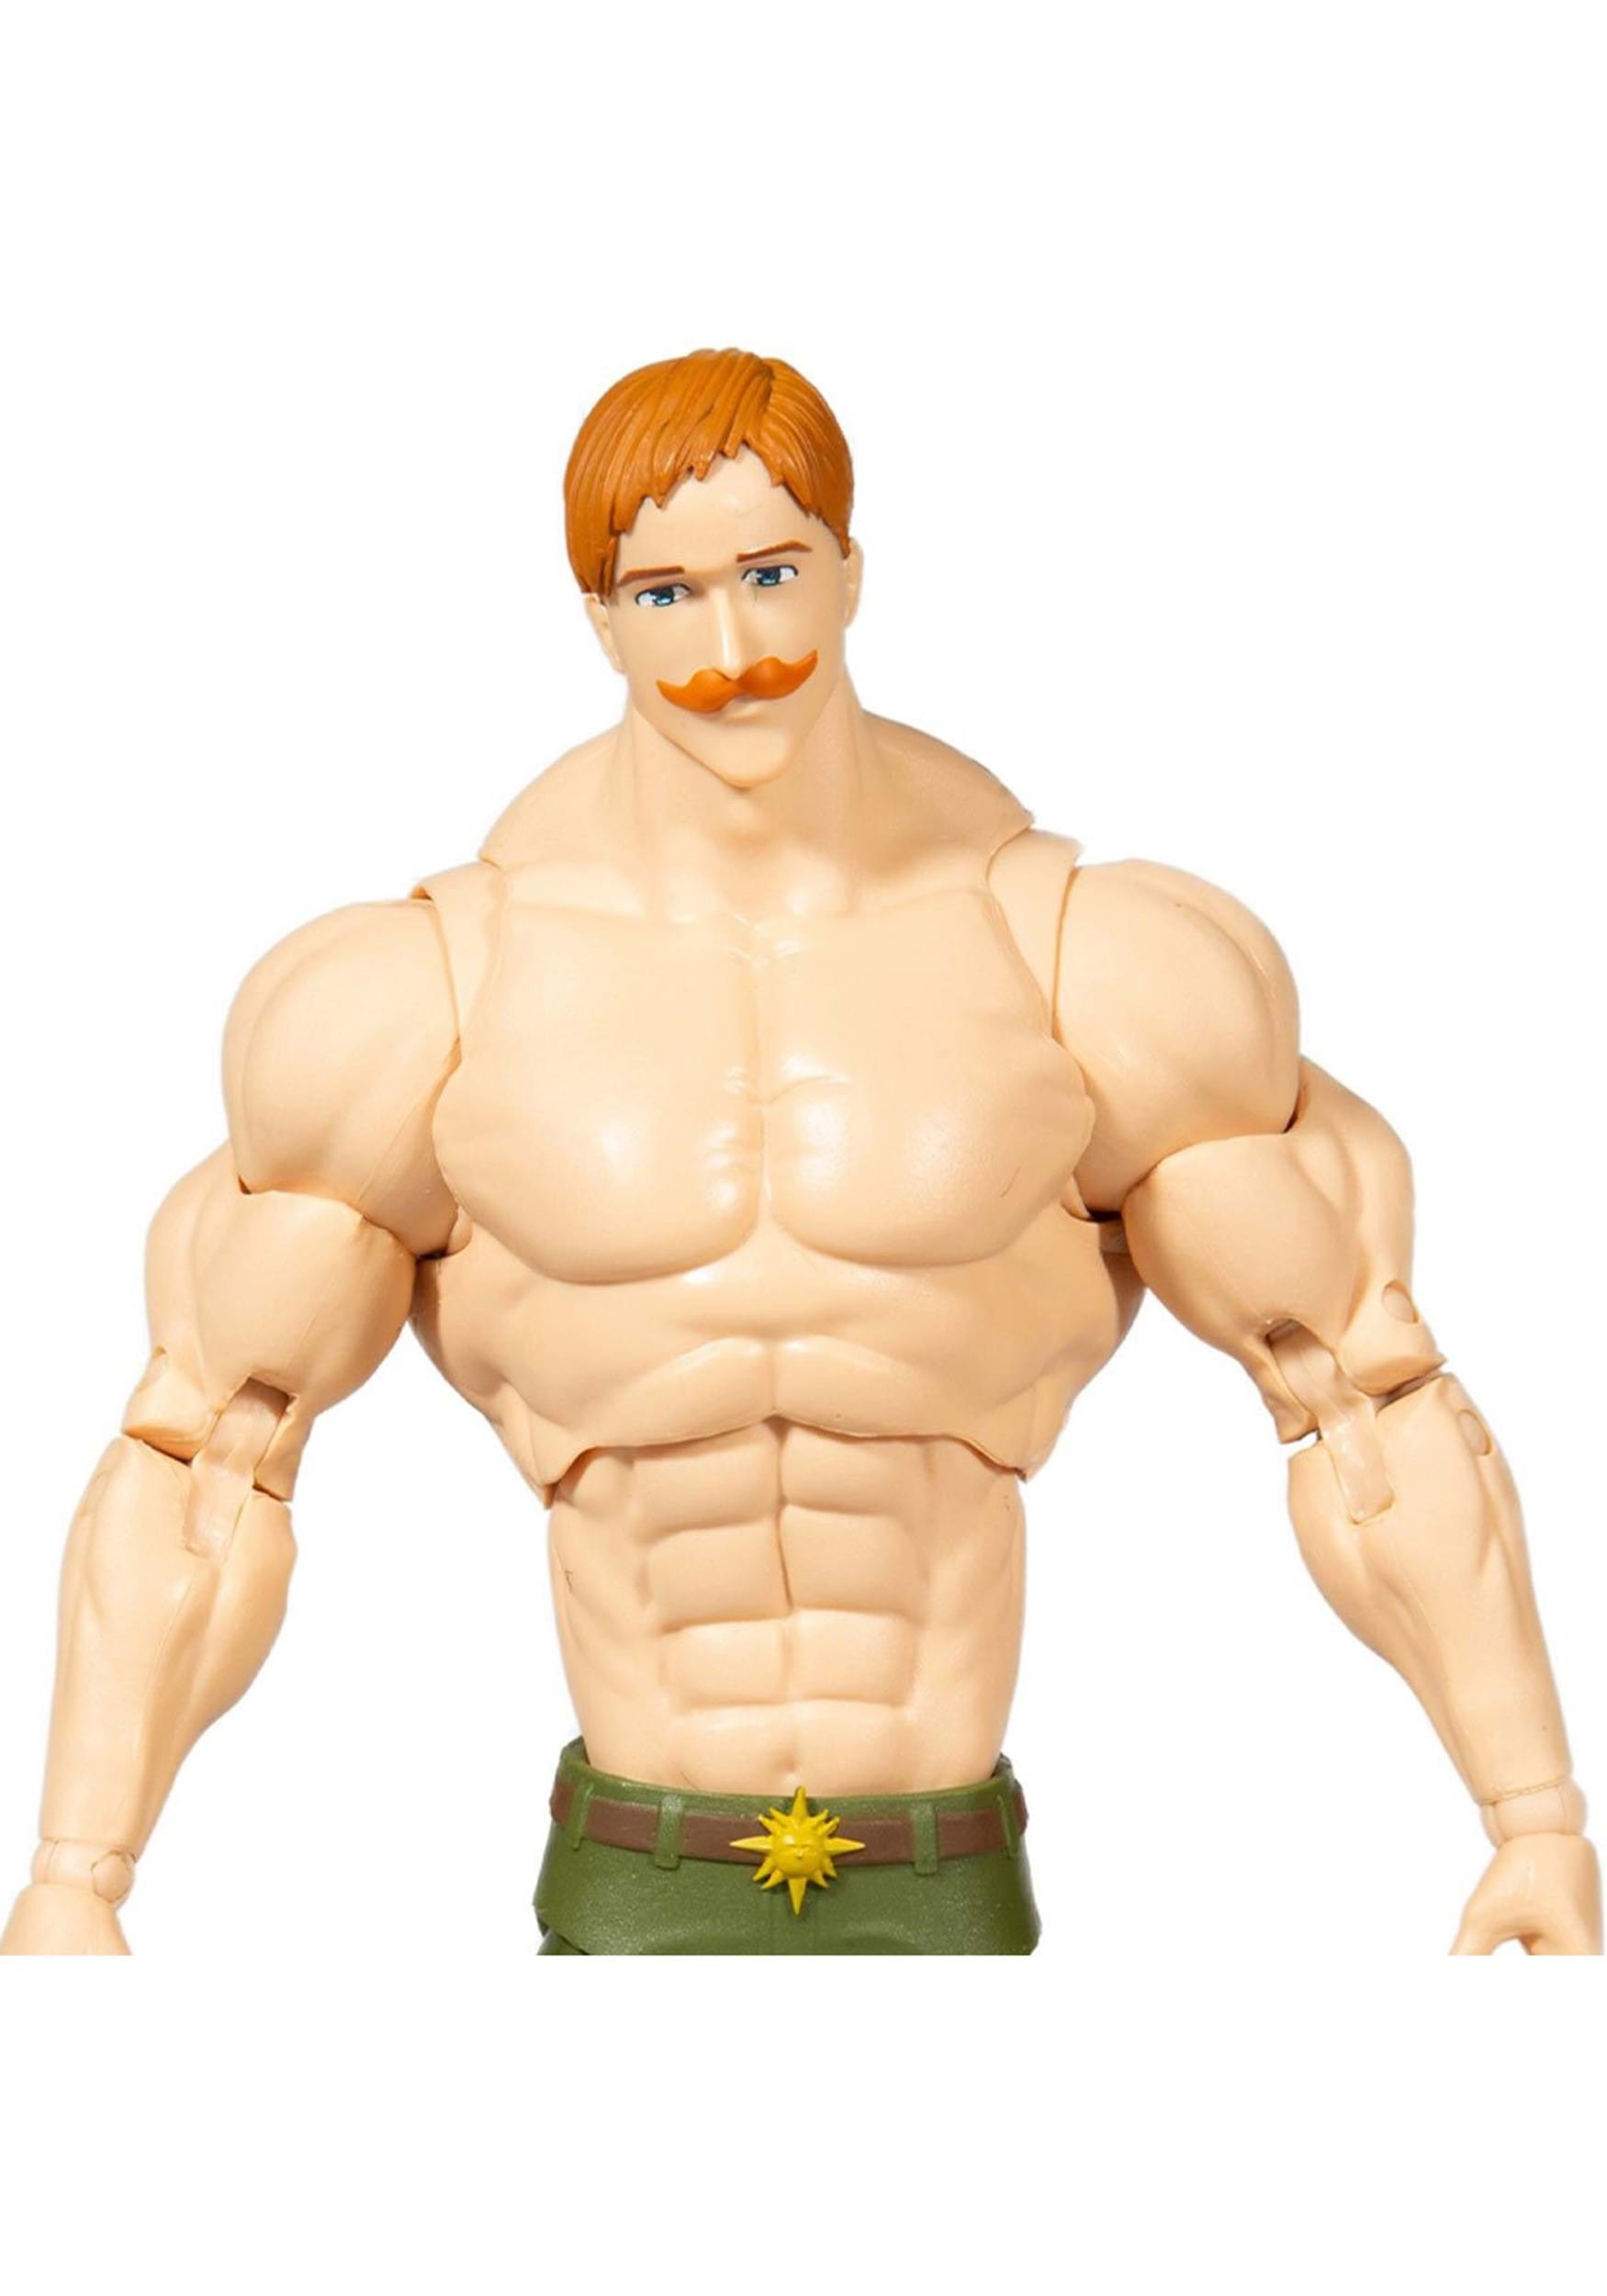 Escanor The Seven Deadly Sins Wave 1 7-Inch Scaled Action Figure